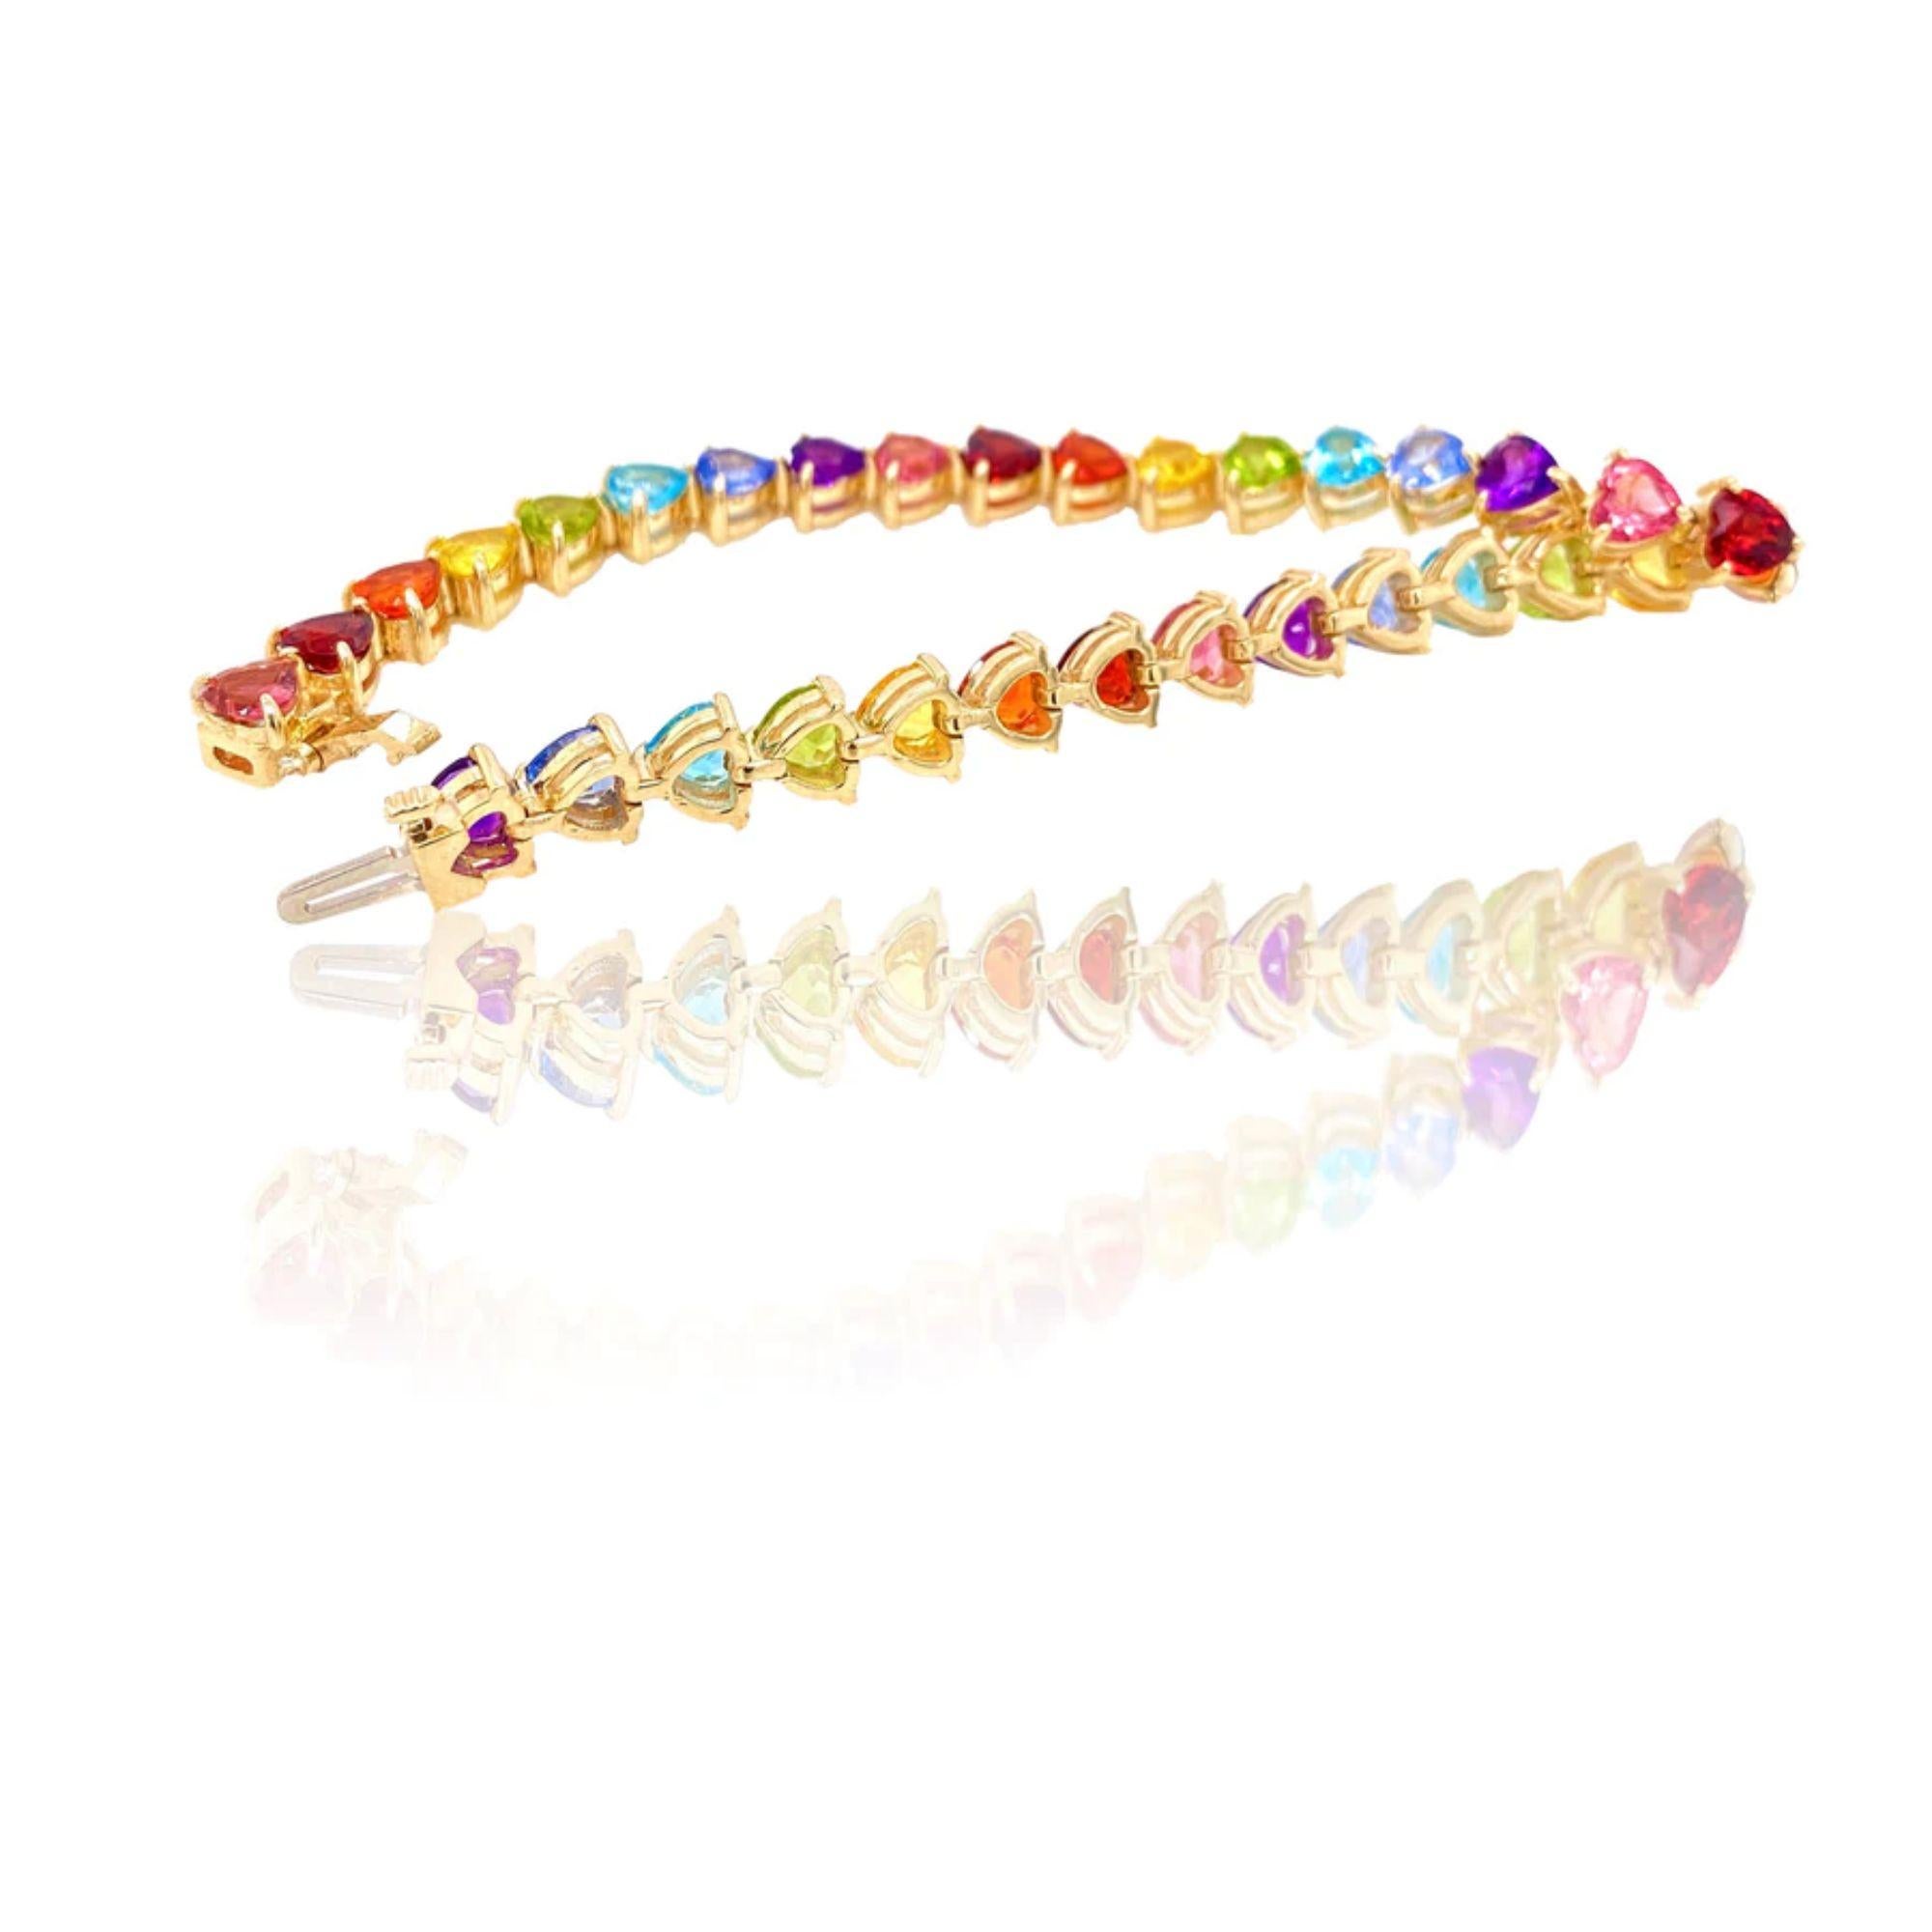 The full rainbow fantasy in the most unique and colorful bracelet to light up your life! This tennis bracelet is like no other consists of heart settings with colored gems and sapphires in the Classic Mordekai rainbow pattern. Goes perfect with our